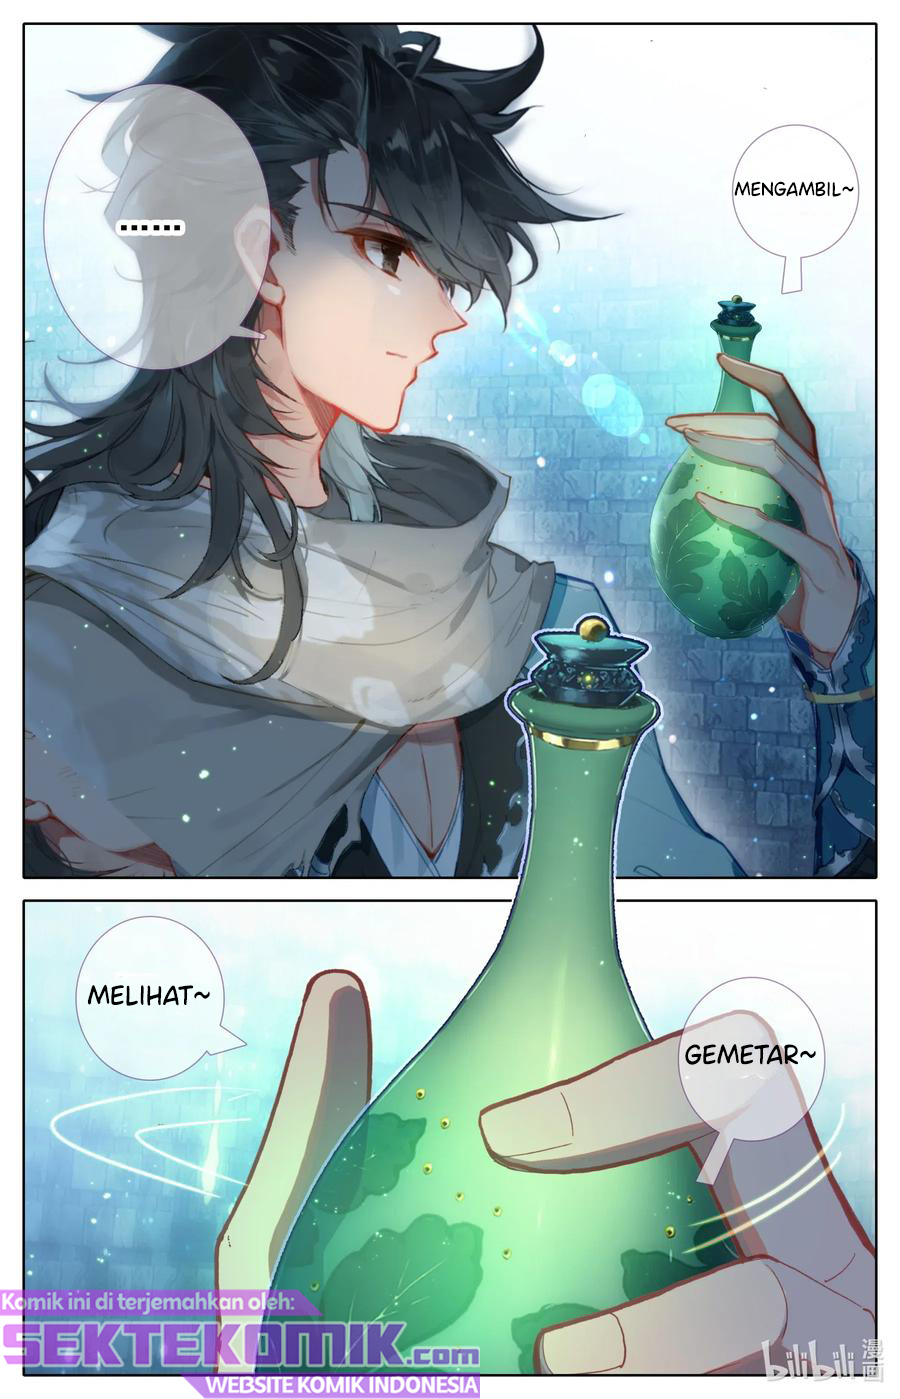 Mortal Cultivation Fairy World Chapter 39